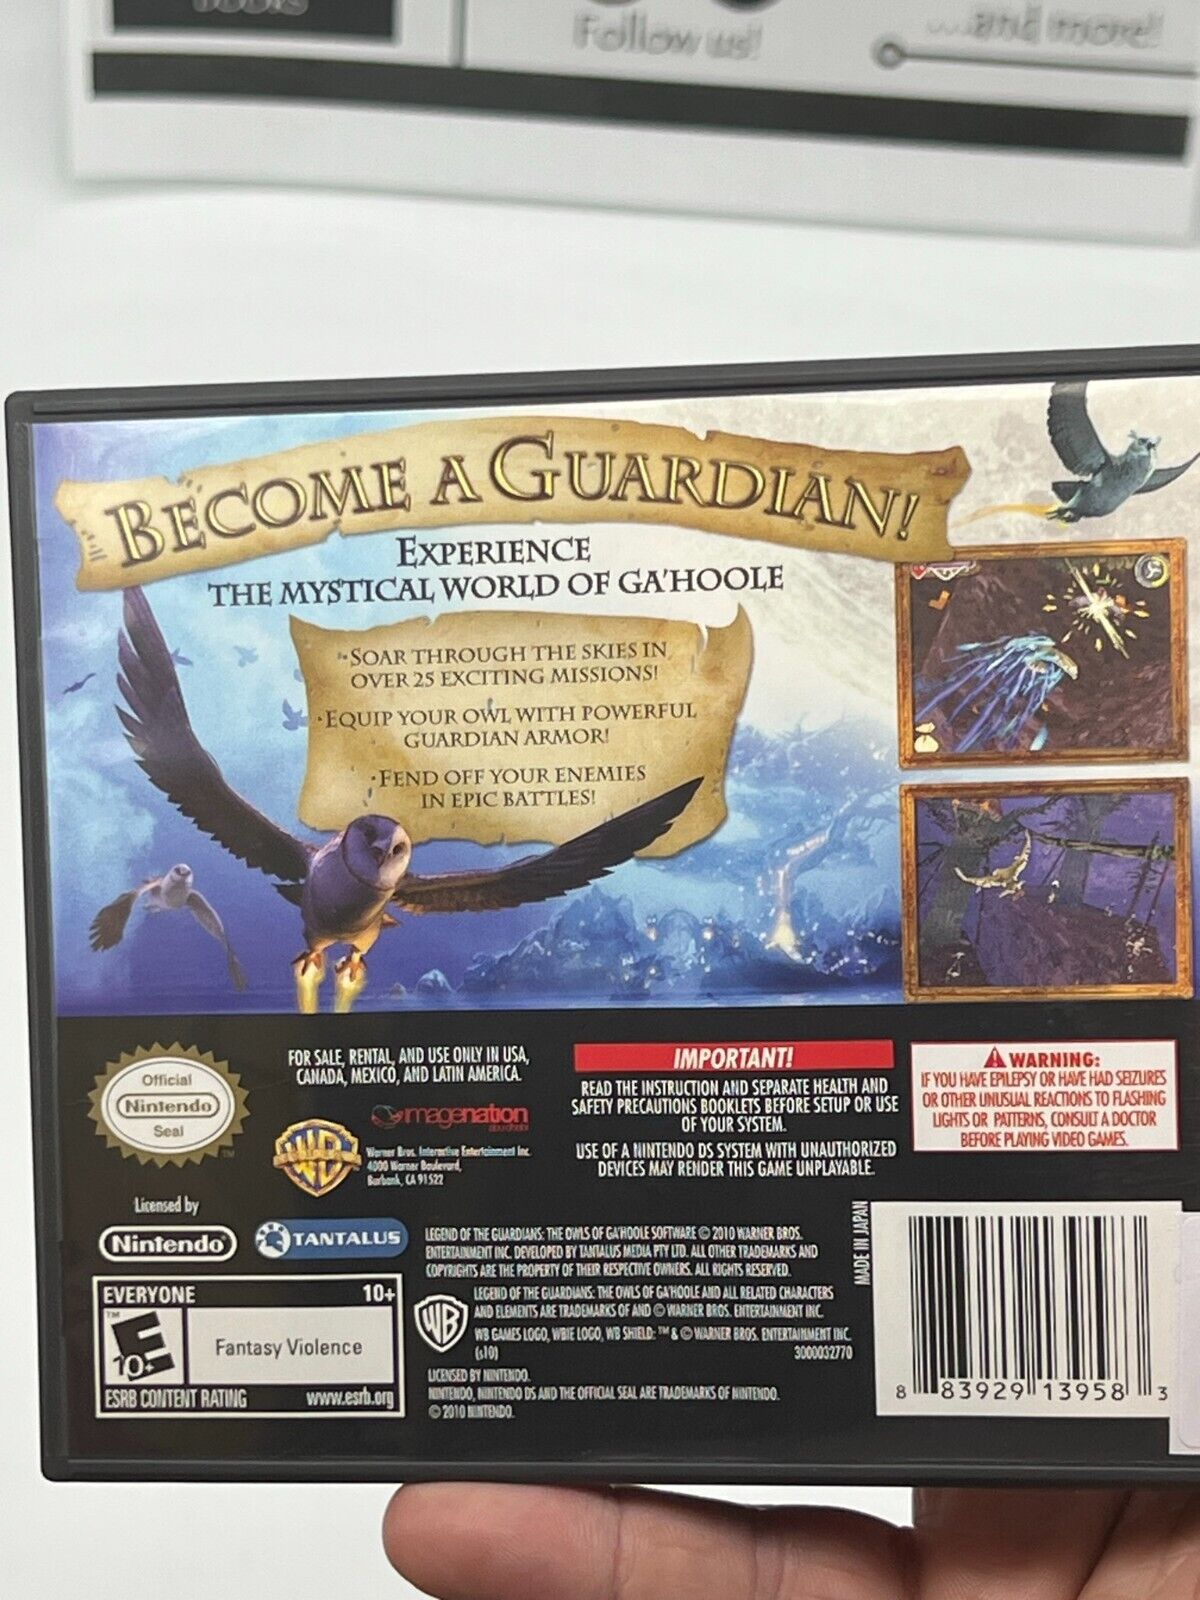 Legend of the Guardians: The Owls of Ga'Hoole (Nintendo DS, 2010) - Tested